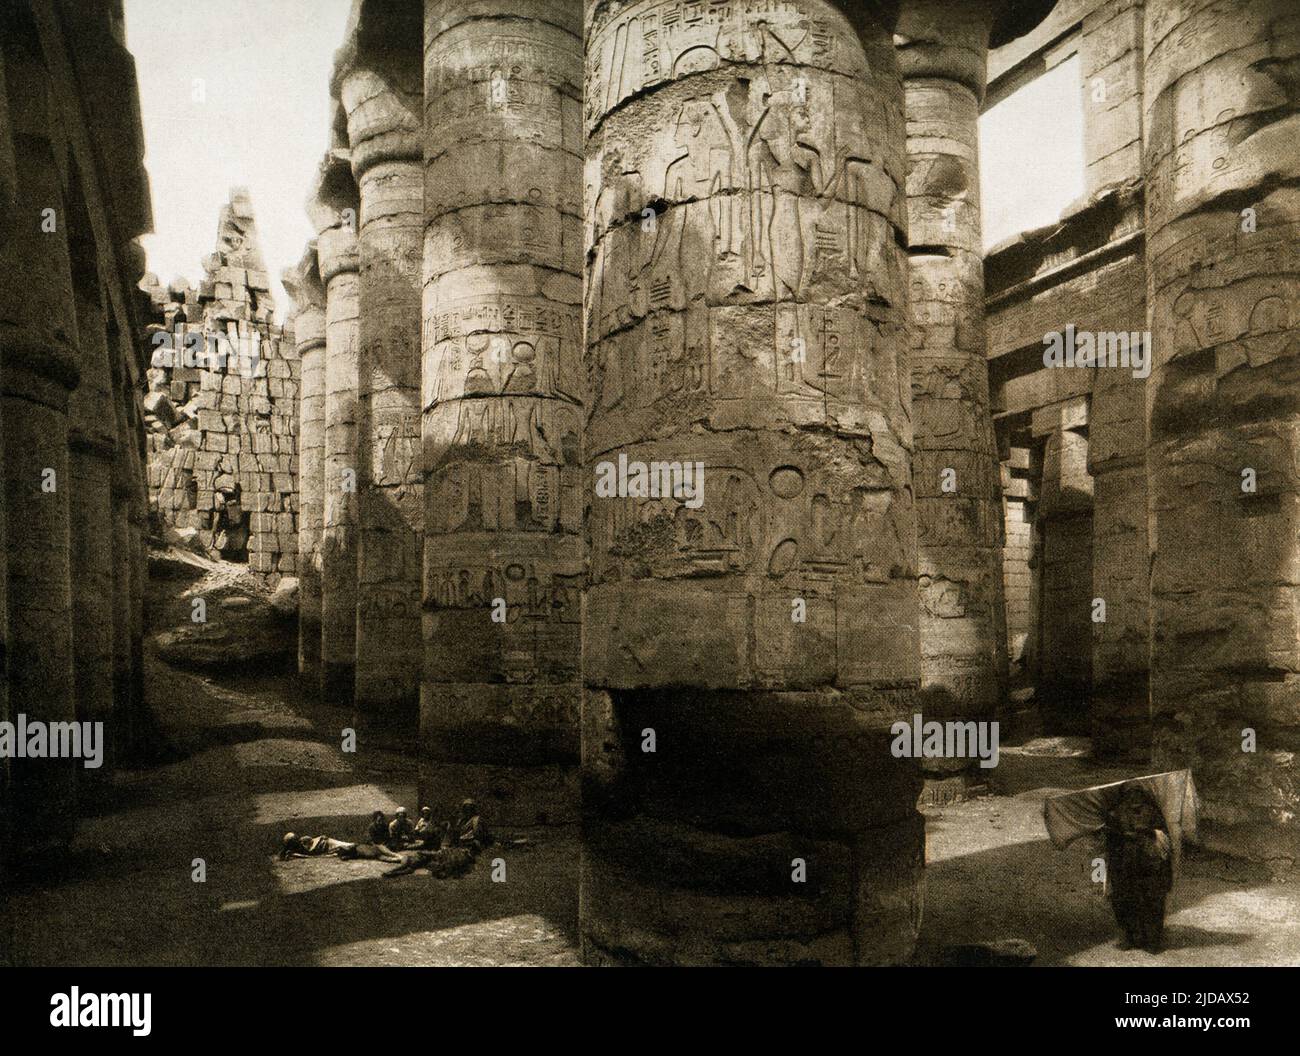 This 1910 image shows the ruins of the Hall of Columns at Karnak. The Great Hypostyle Hall Karnak is composed of 134 giant sandstone columns in the form of papyrus stalks. Twelve great columns in its central nave are 70-plus feet in height and are capped by huge open papyrus blossom capitals. The main east-west axis of the Hypostyle Hall is dominated by a double row of 12 giant columns. This image is from a photogravure in  Egypt  by the German archaeologists Ebers and Junghaendel. Stock Photo